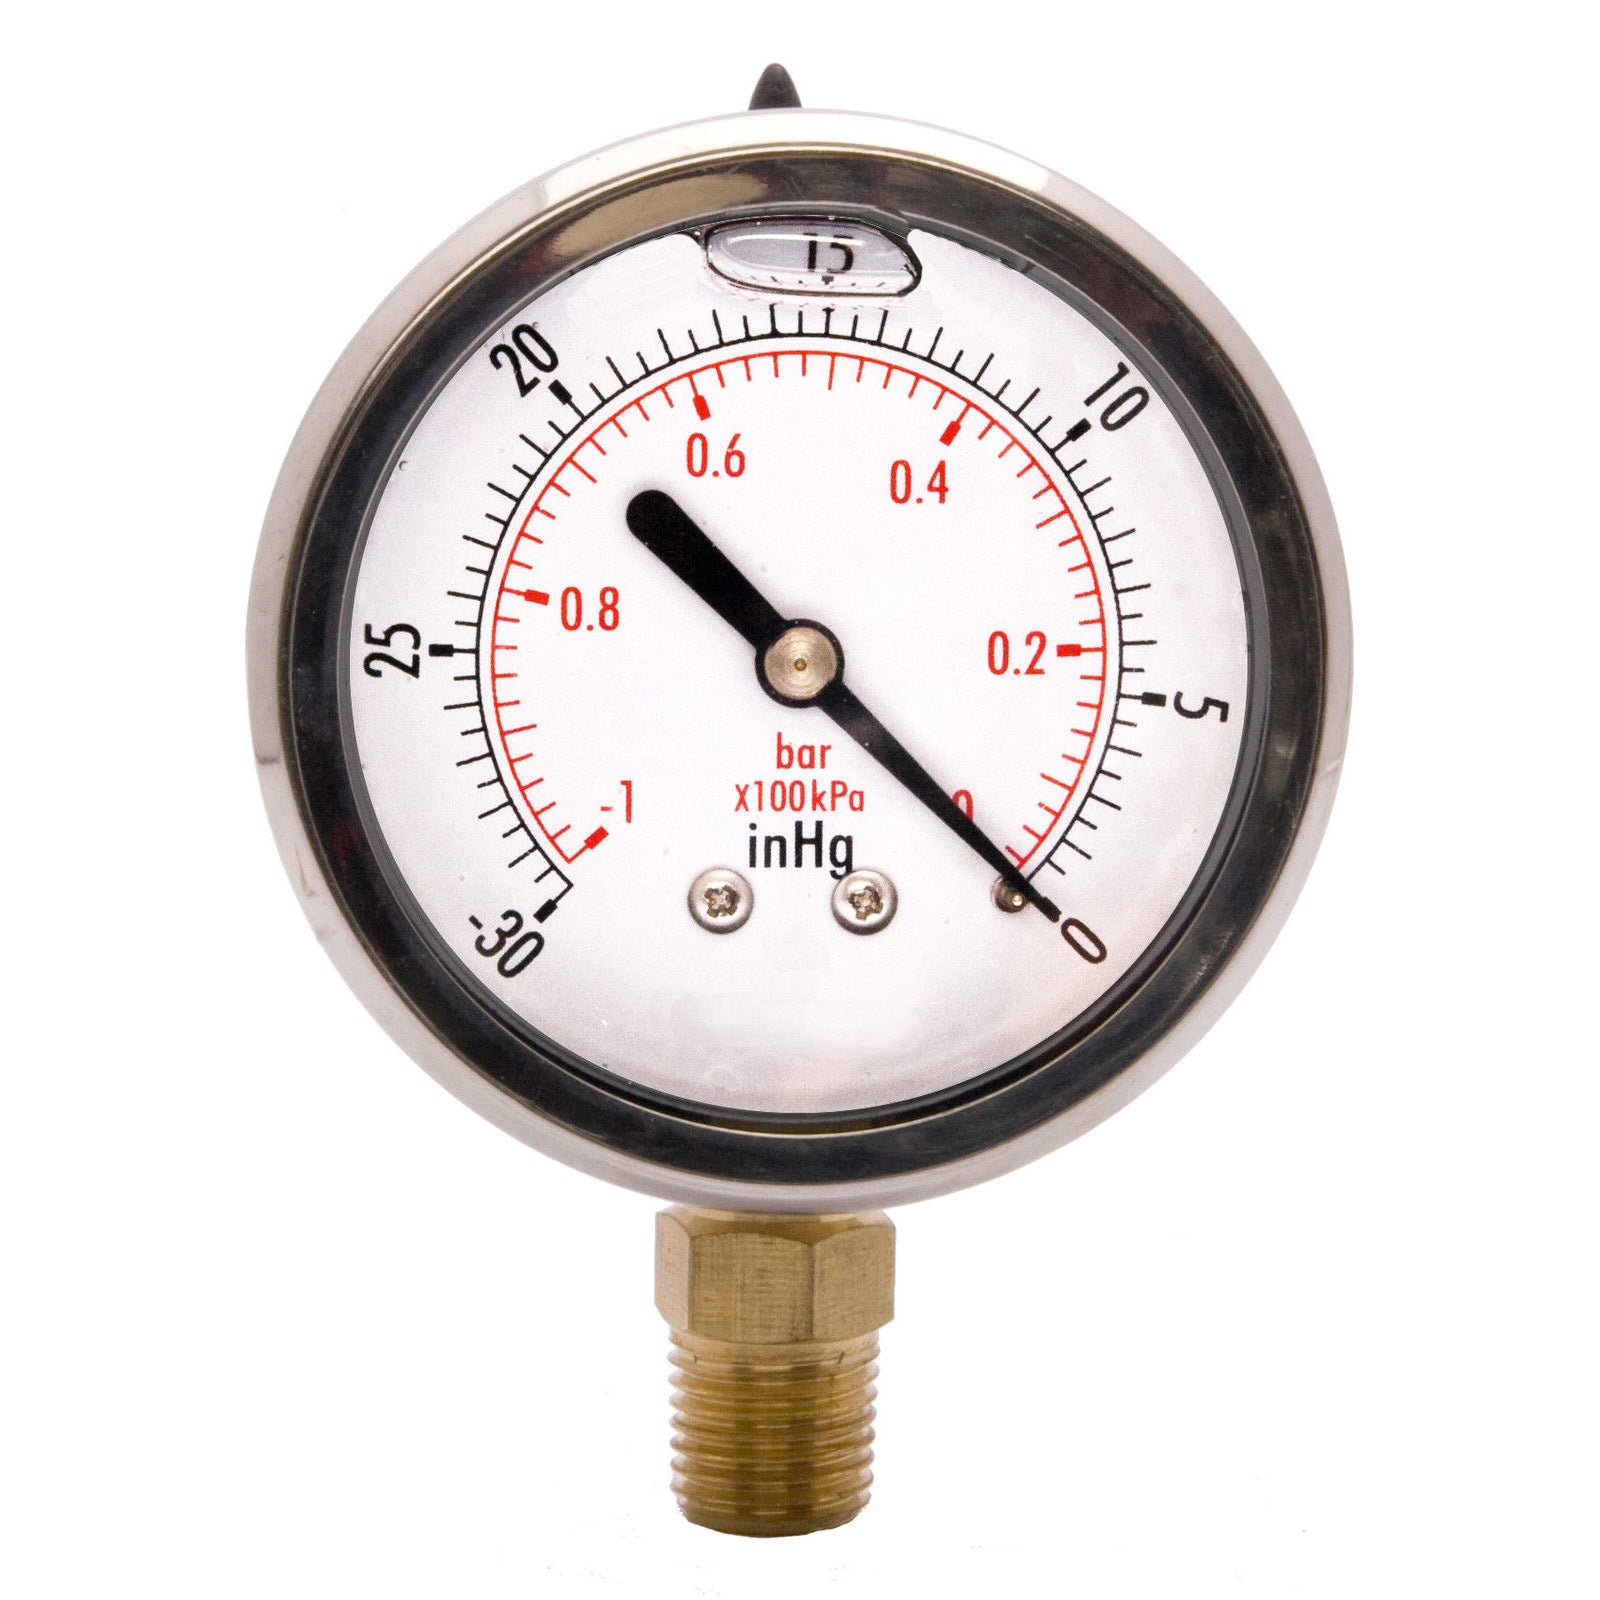 Hardware Factory Store Inc - Vacuum Pressure Gauges 0 To -30Hg - Oil Filled 2.5" Dial - 1/4" NPT